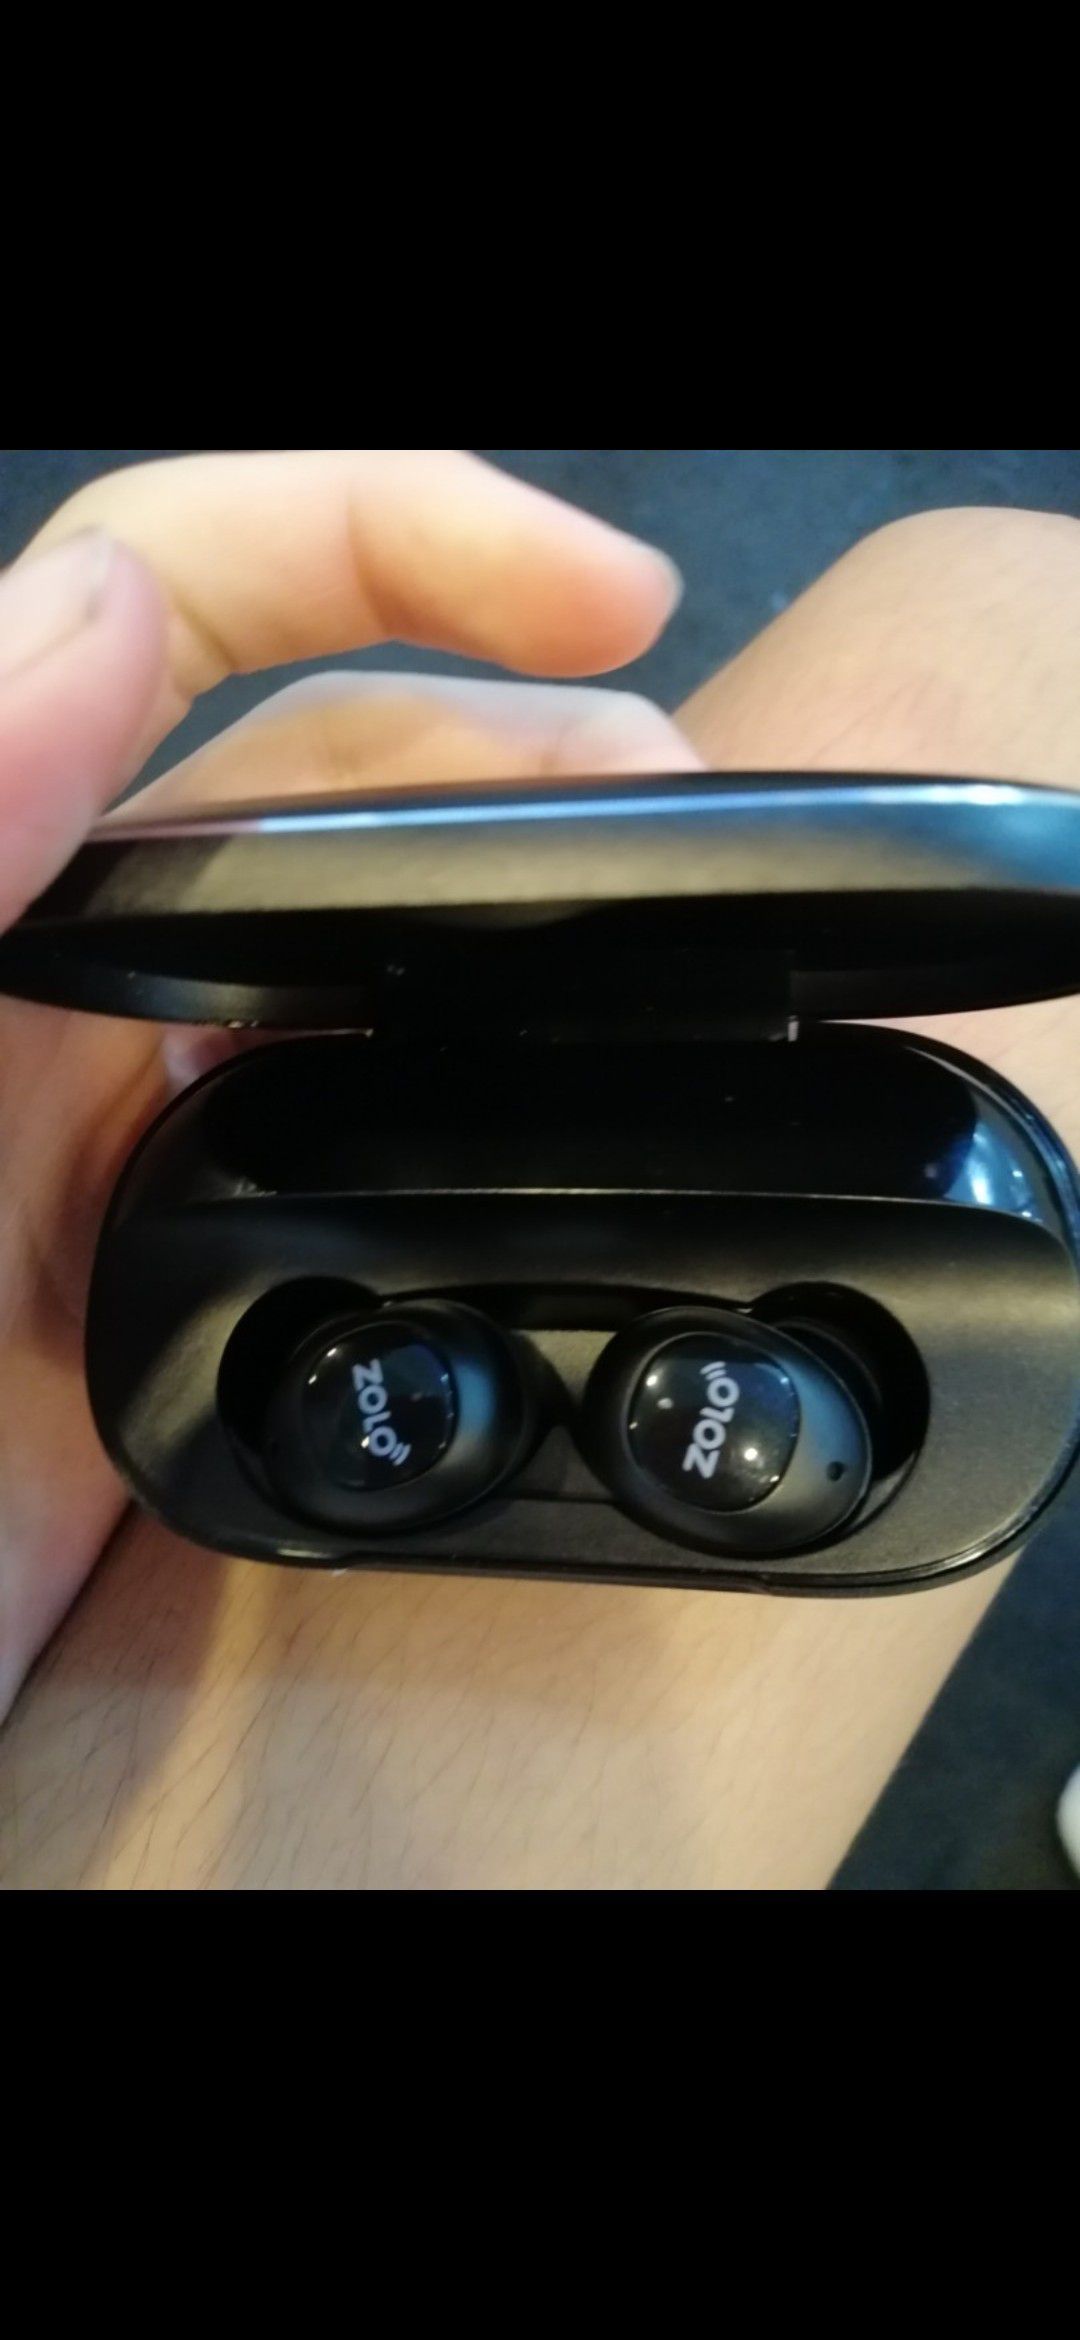 Anker ZOLO True Wireless Earbuds! Brand New! Sound amazing! Bluetooth wireless headphones. Includes case to charge them in!